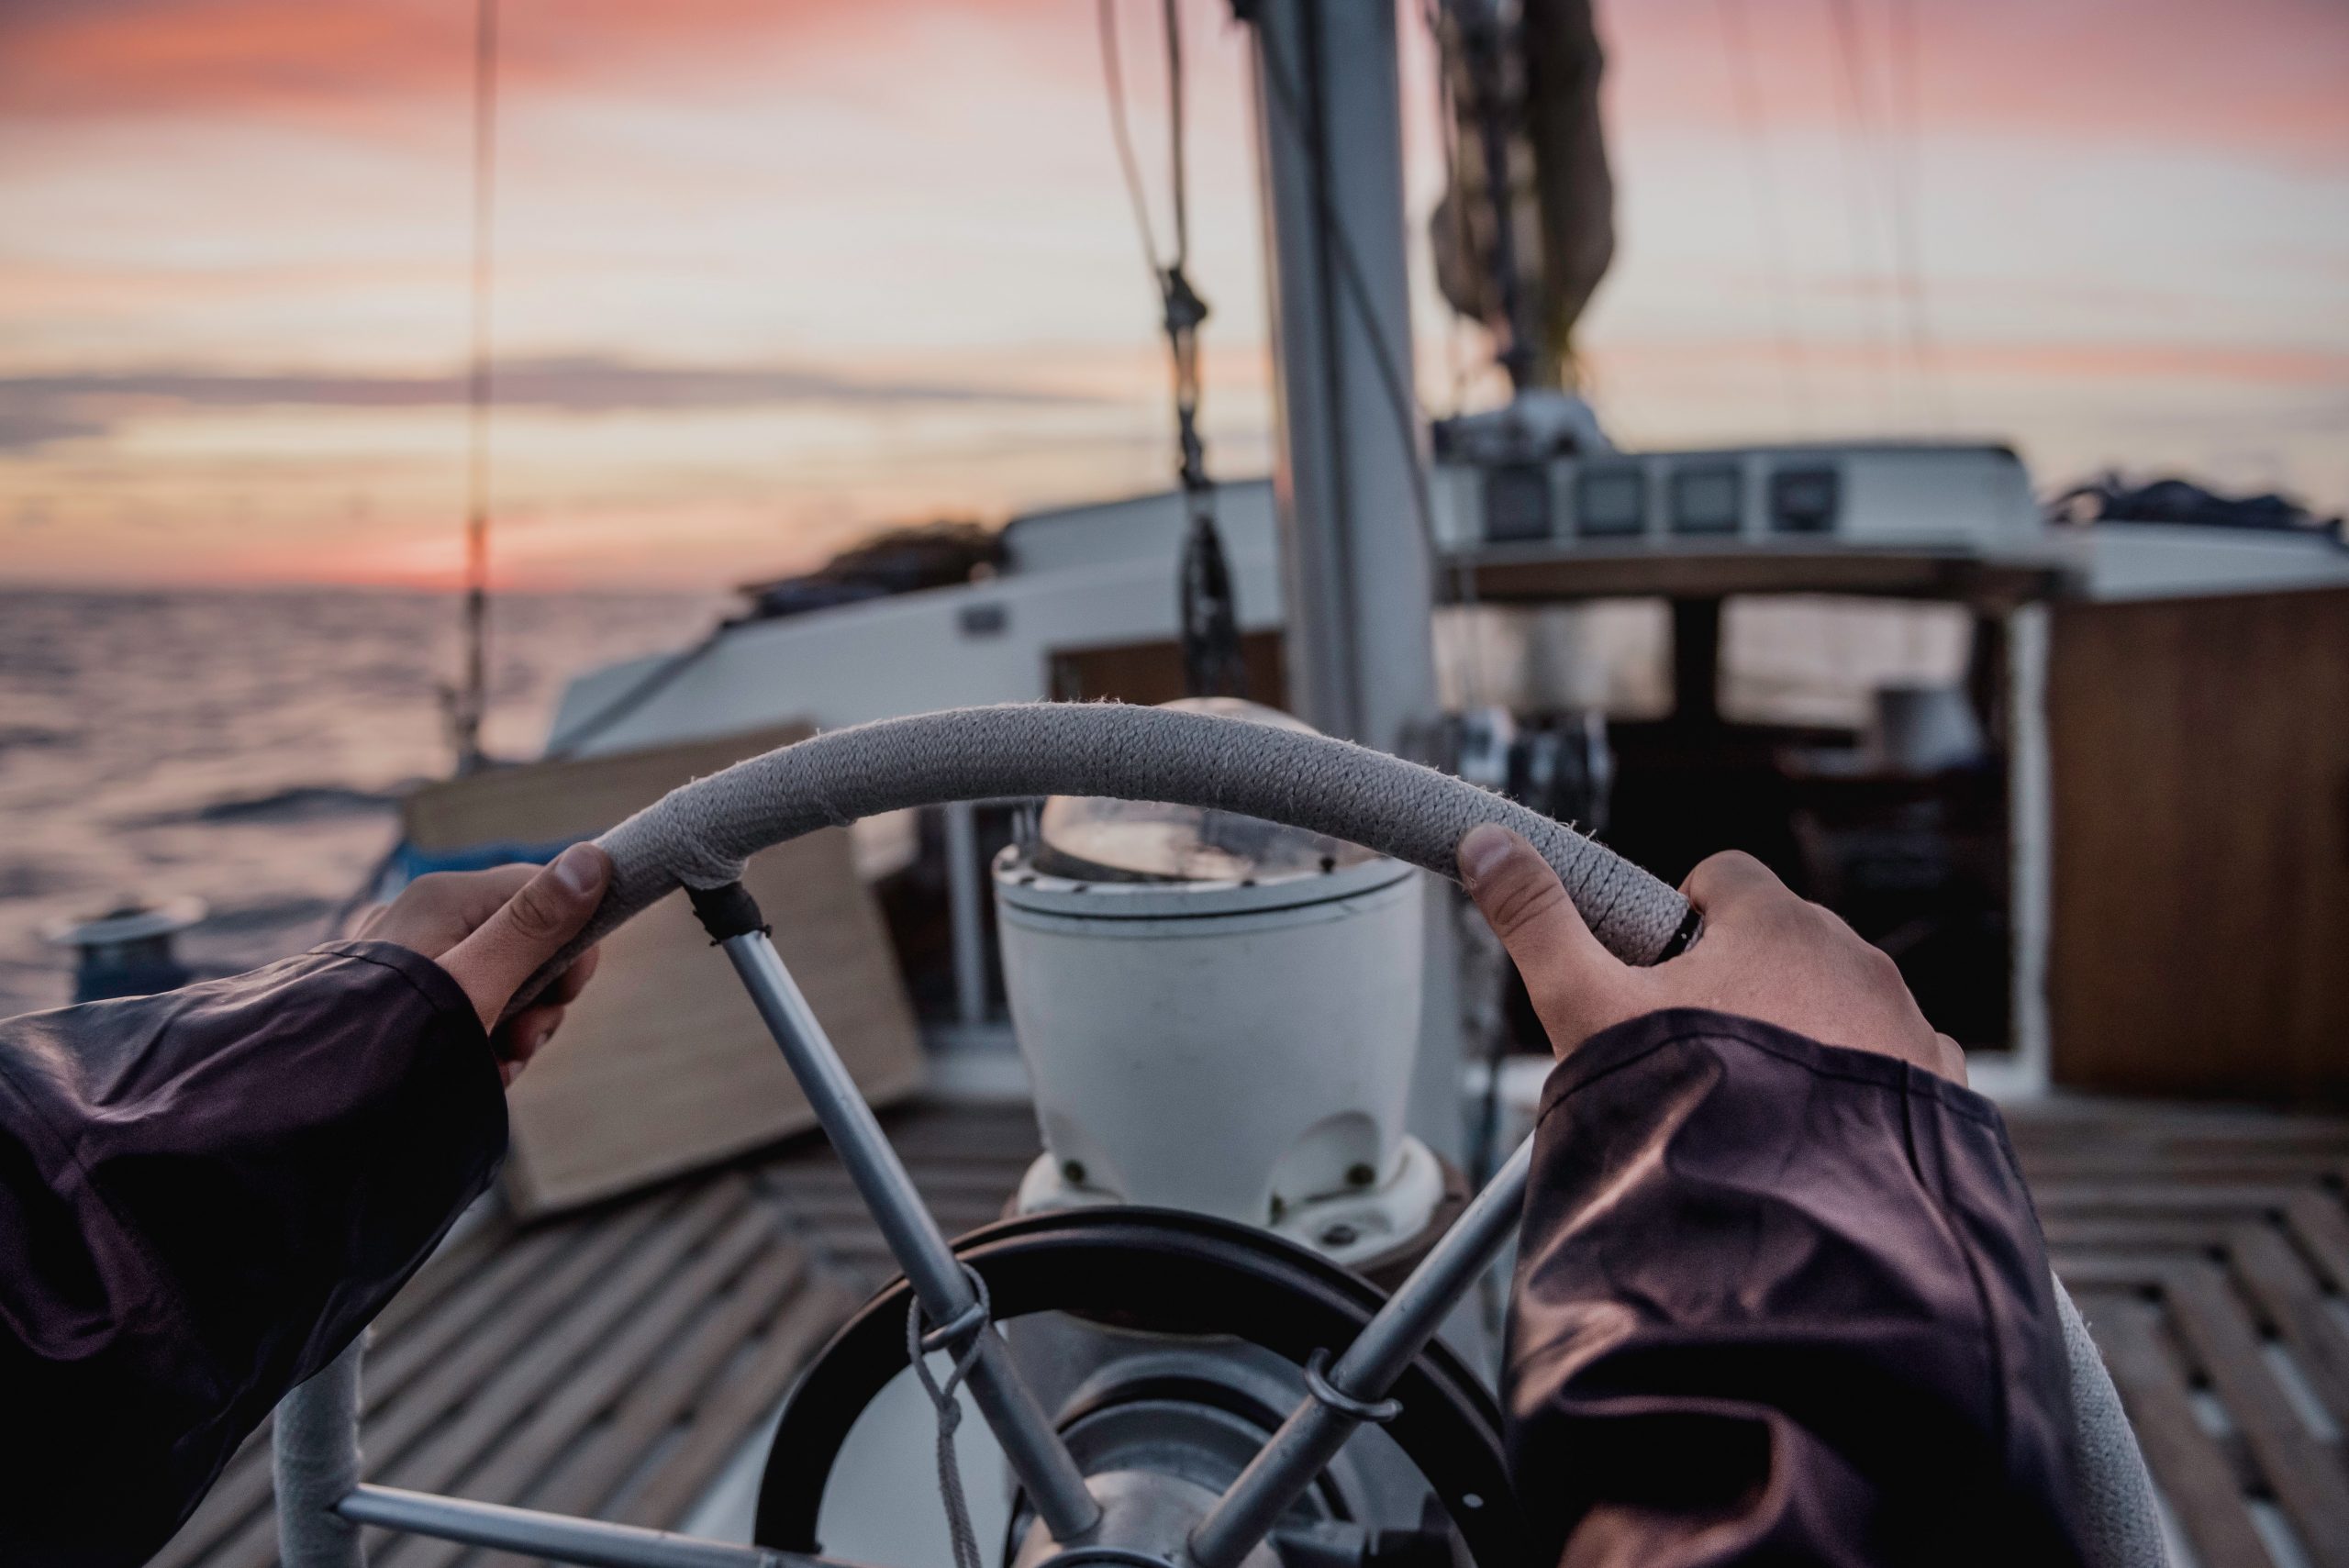 The steering wheel of a boat